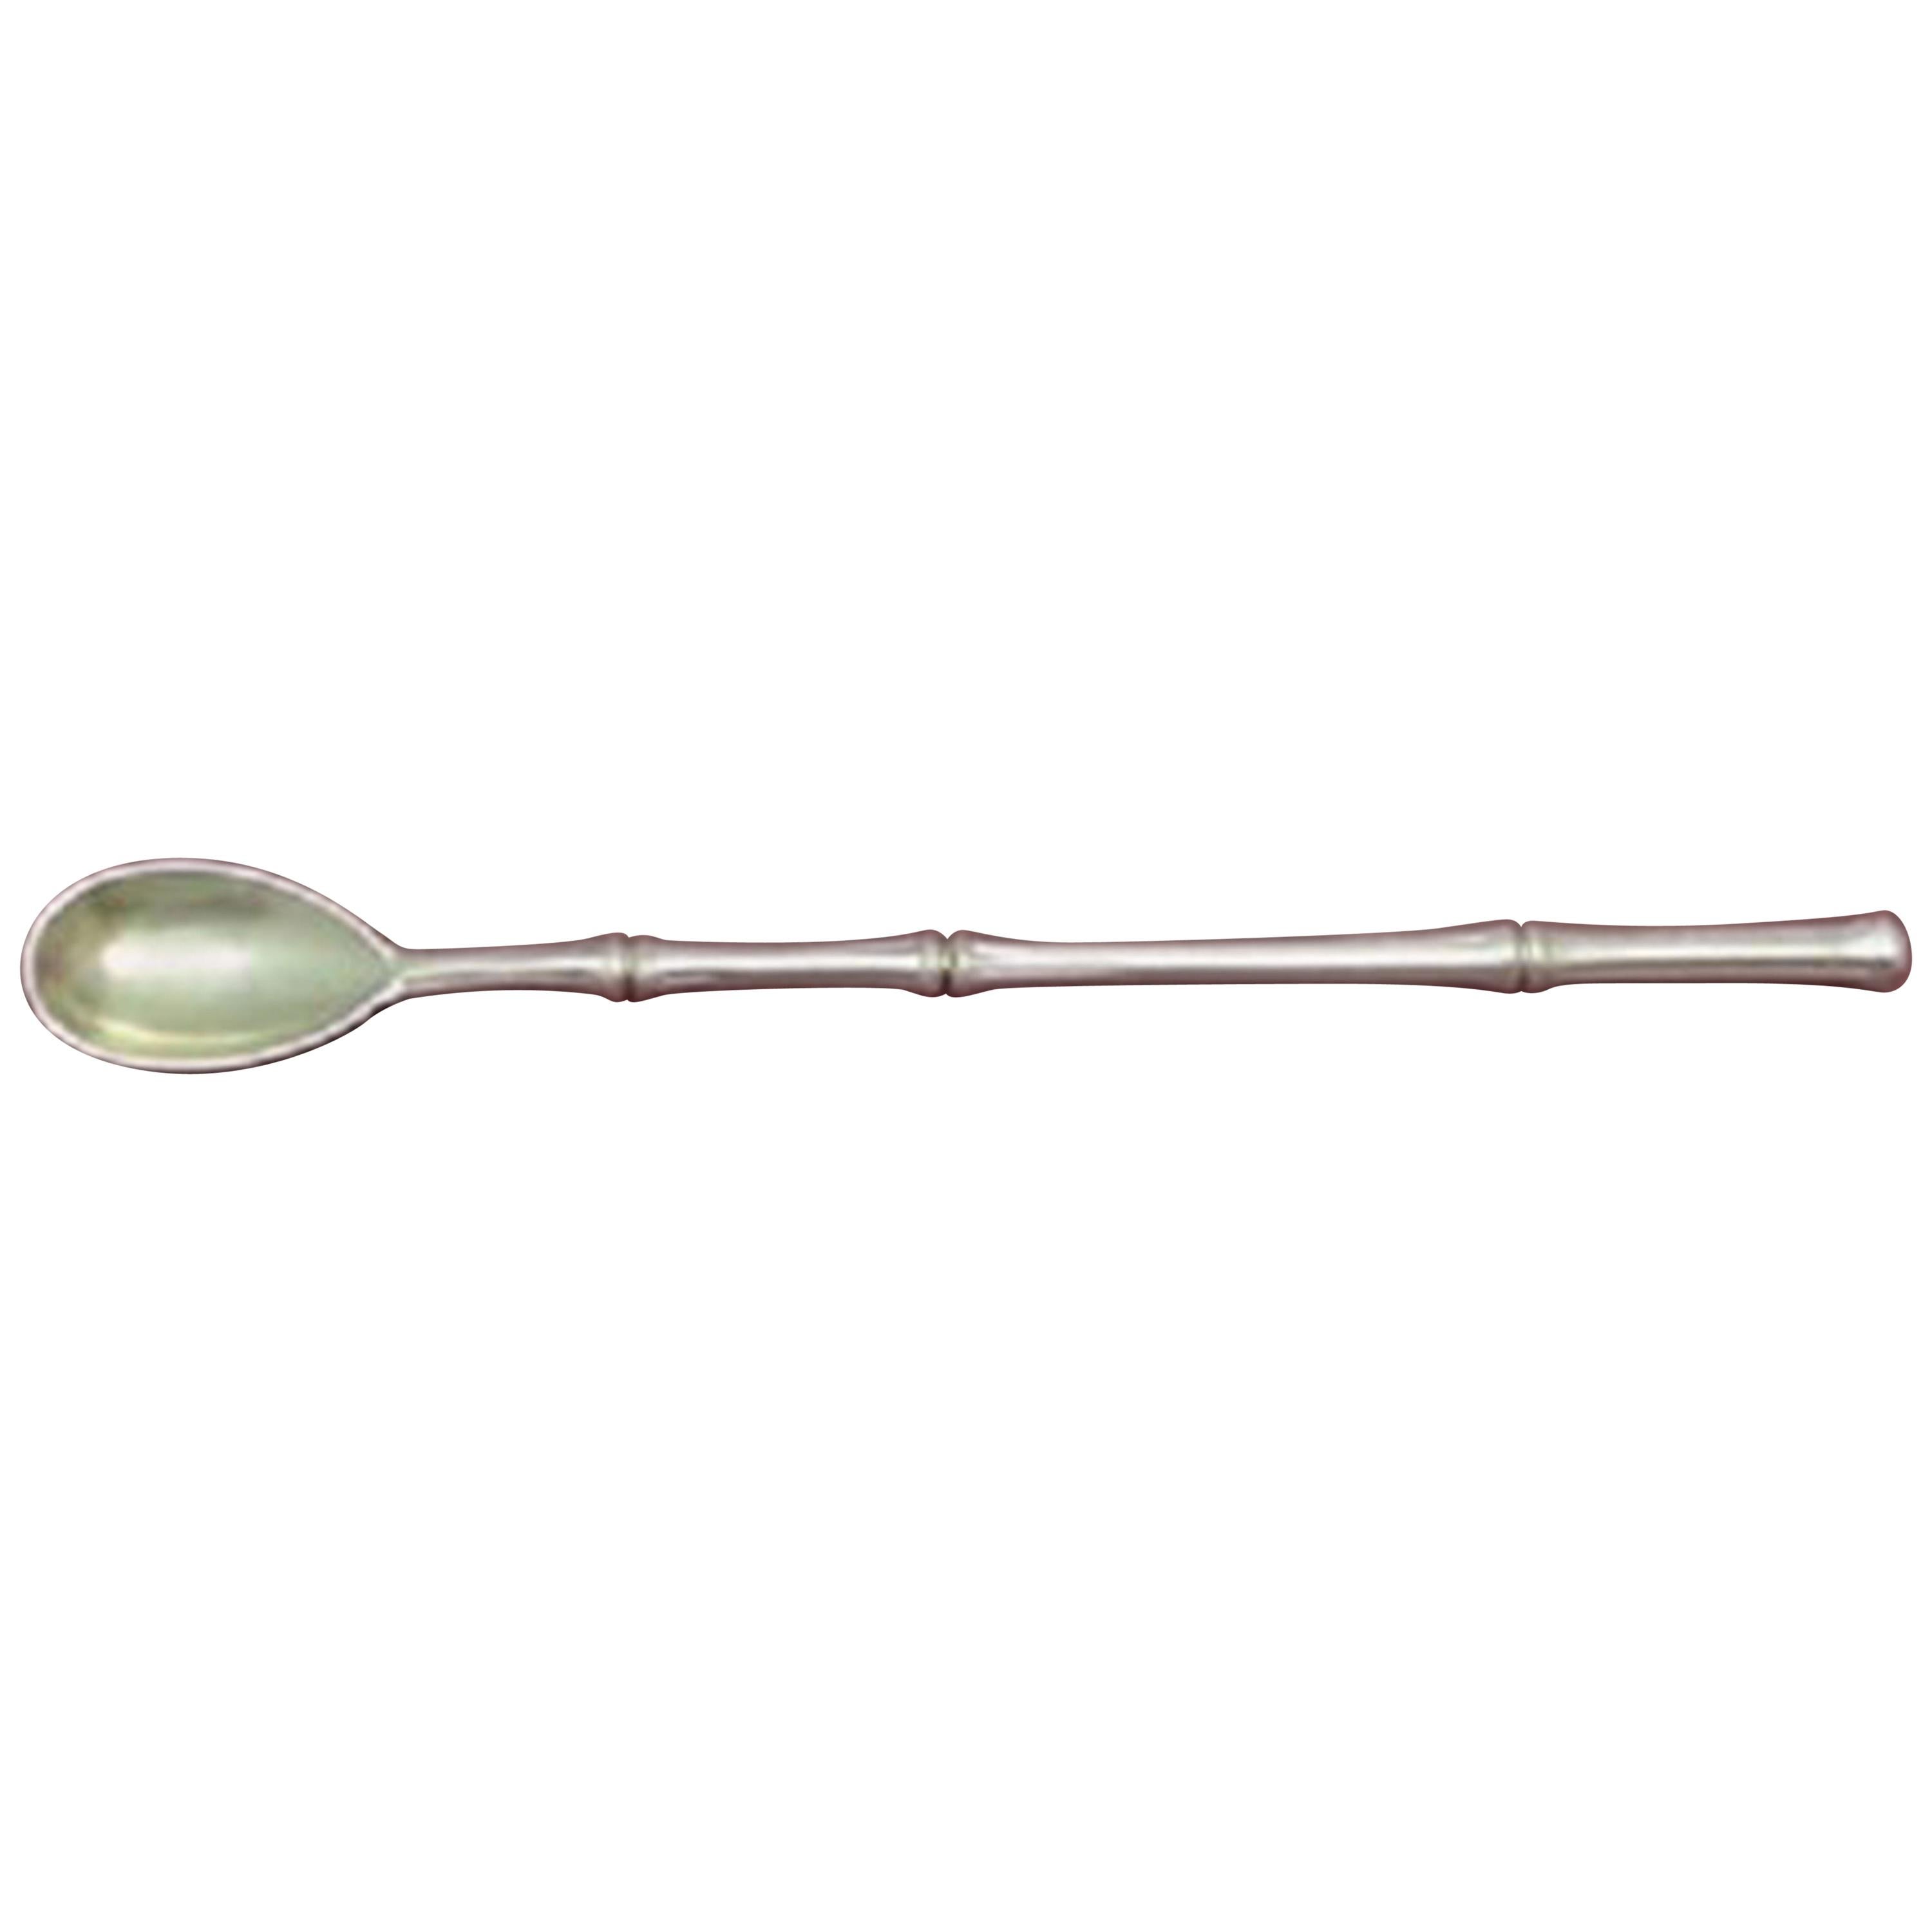 Bamboo by Tiffany & Co Sterling Silver Iced Tea Spoon